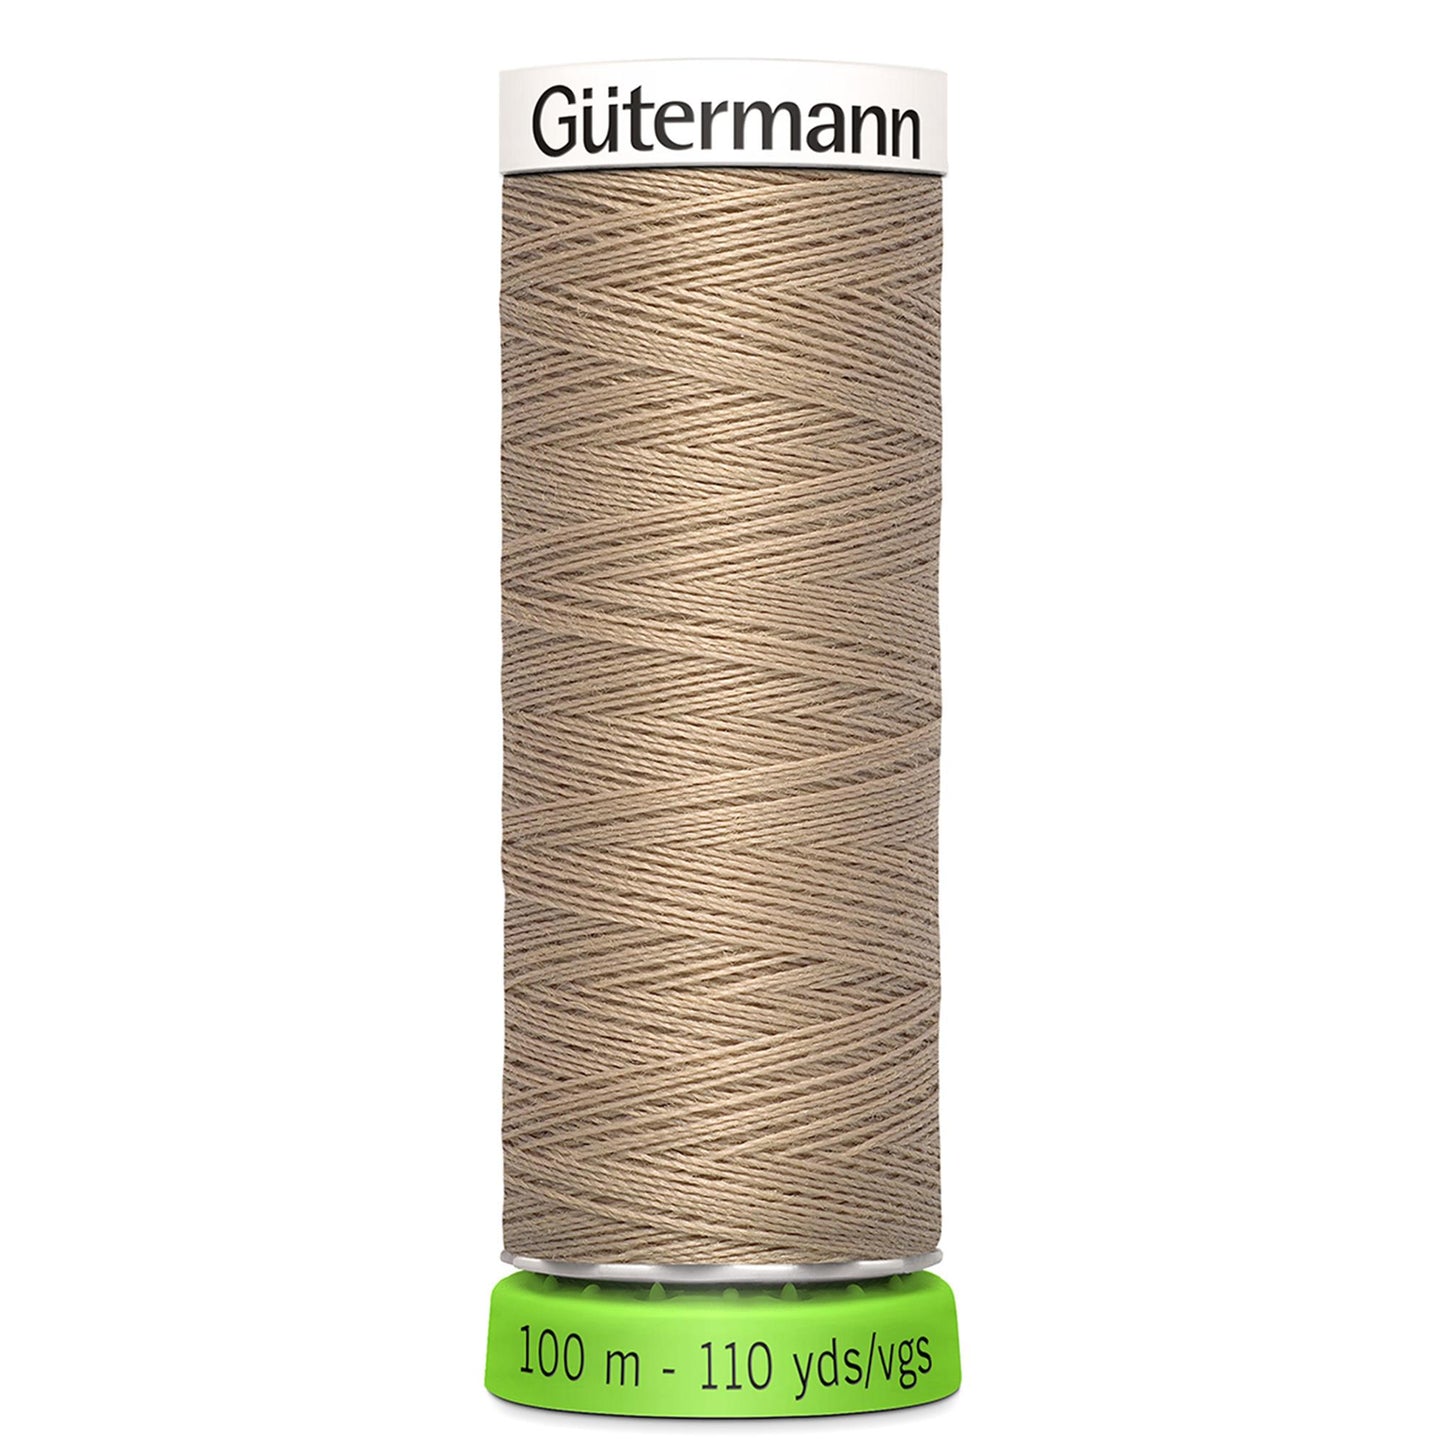 Gütermann rPet (100% Recycled) Sew-All Thread 100m - Col. 215 - Putty